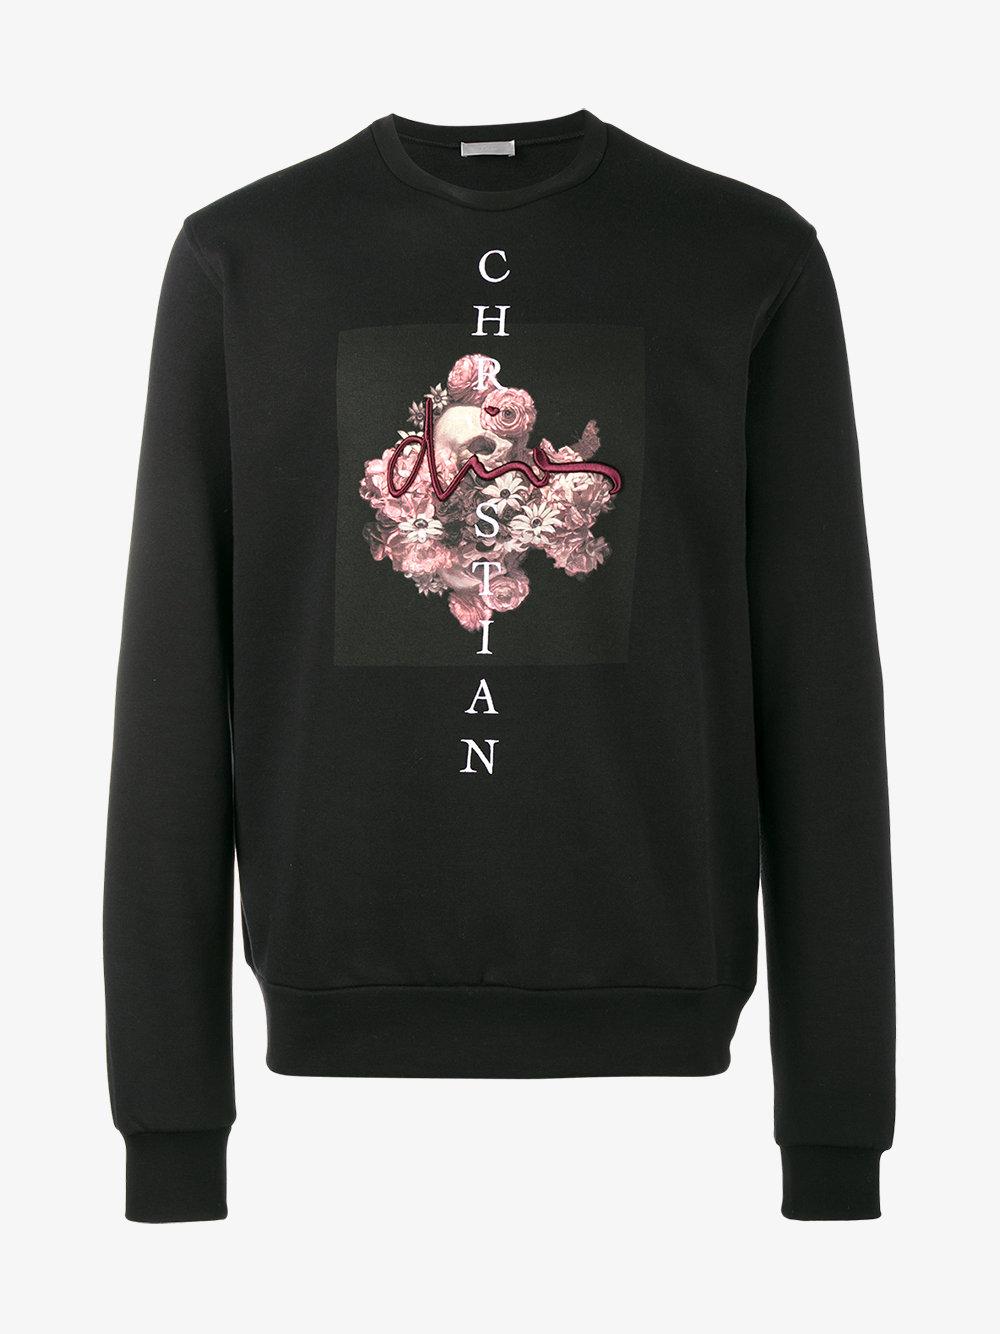 Dior Homme Cotton Flower And Skull Sweatshirt in Black for ...